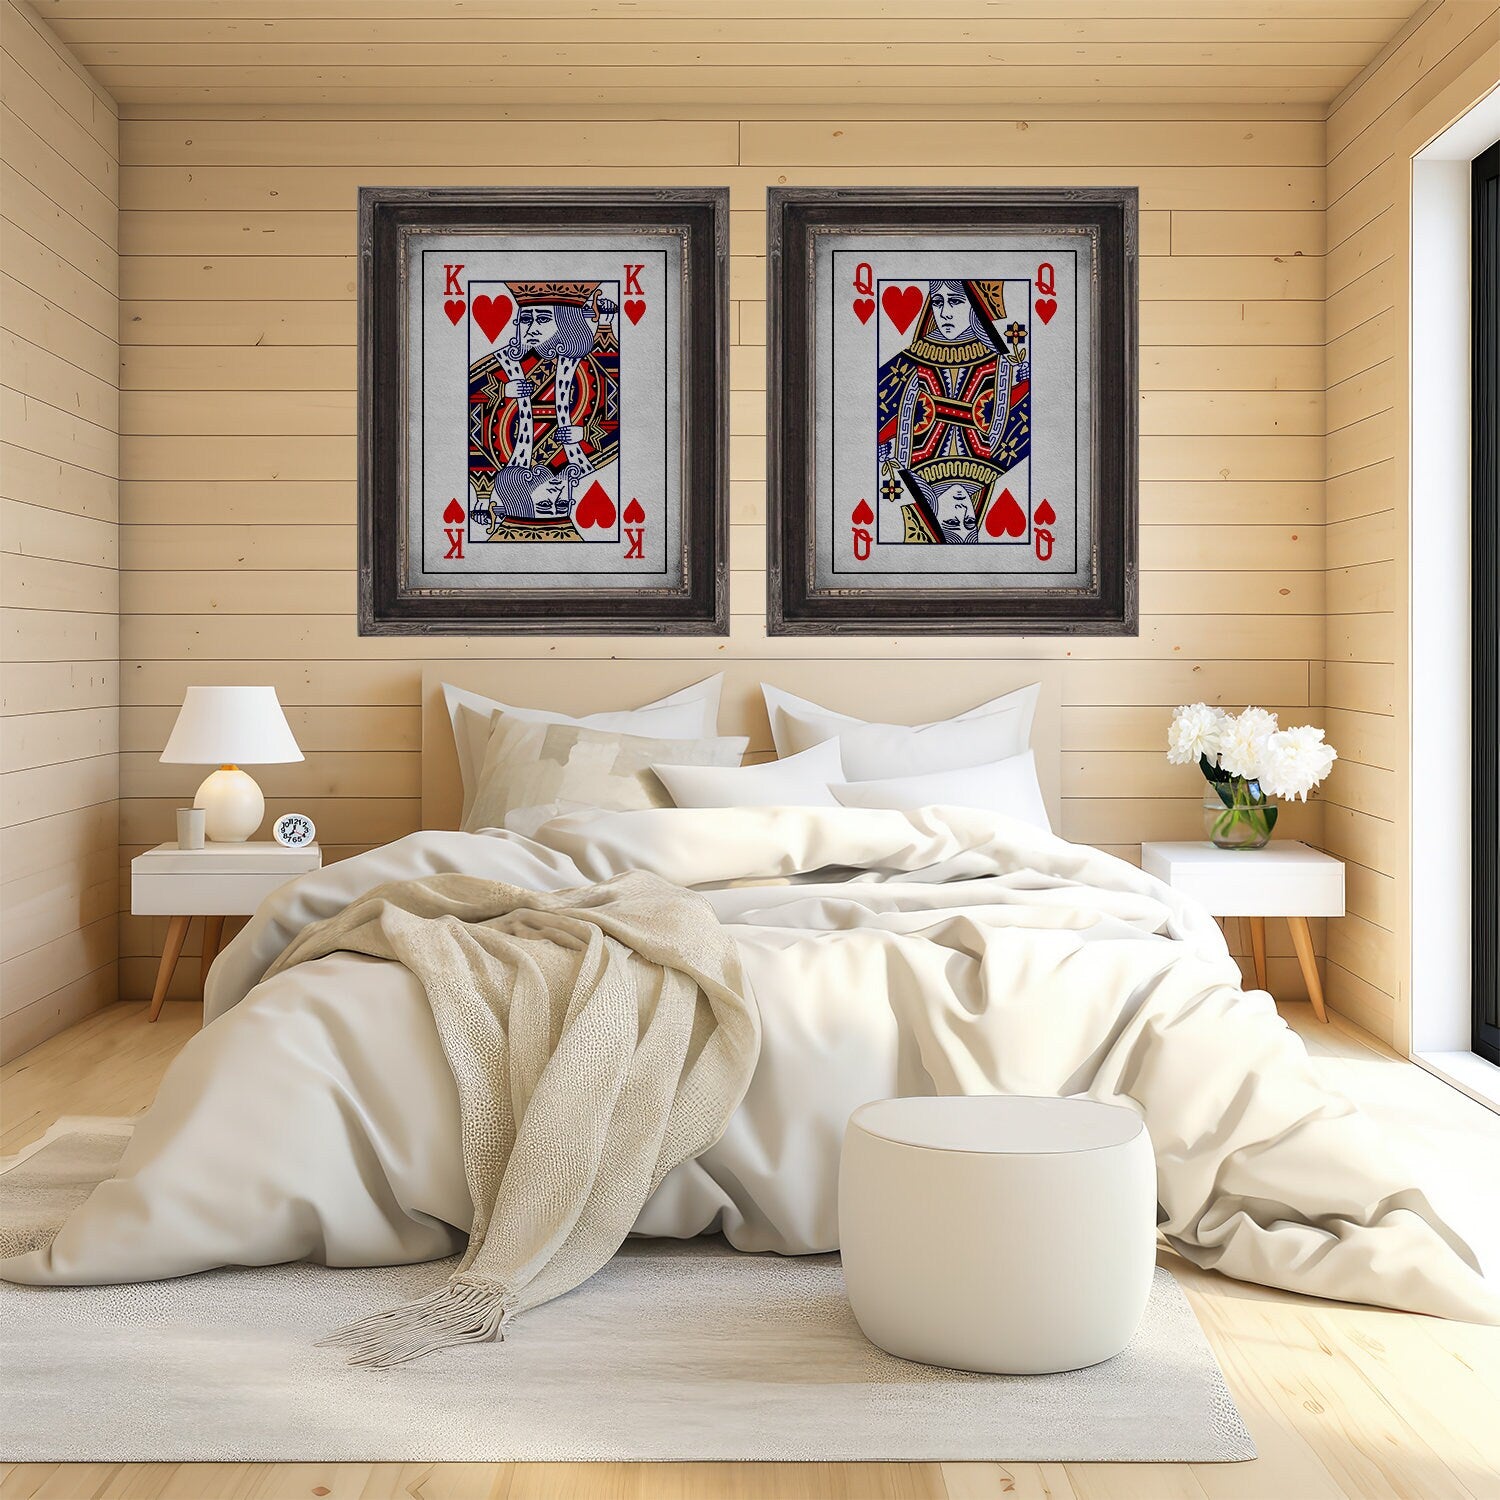 King &amp; Queen of Hearts Playing Card Fine Prints - Rustic Poker Card Posters at Adirondack Retro